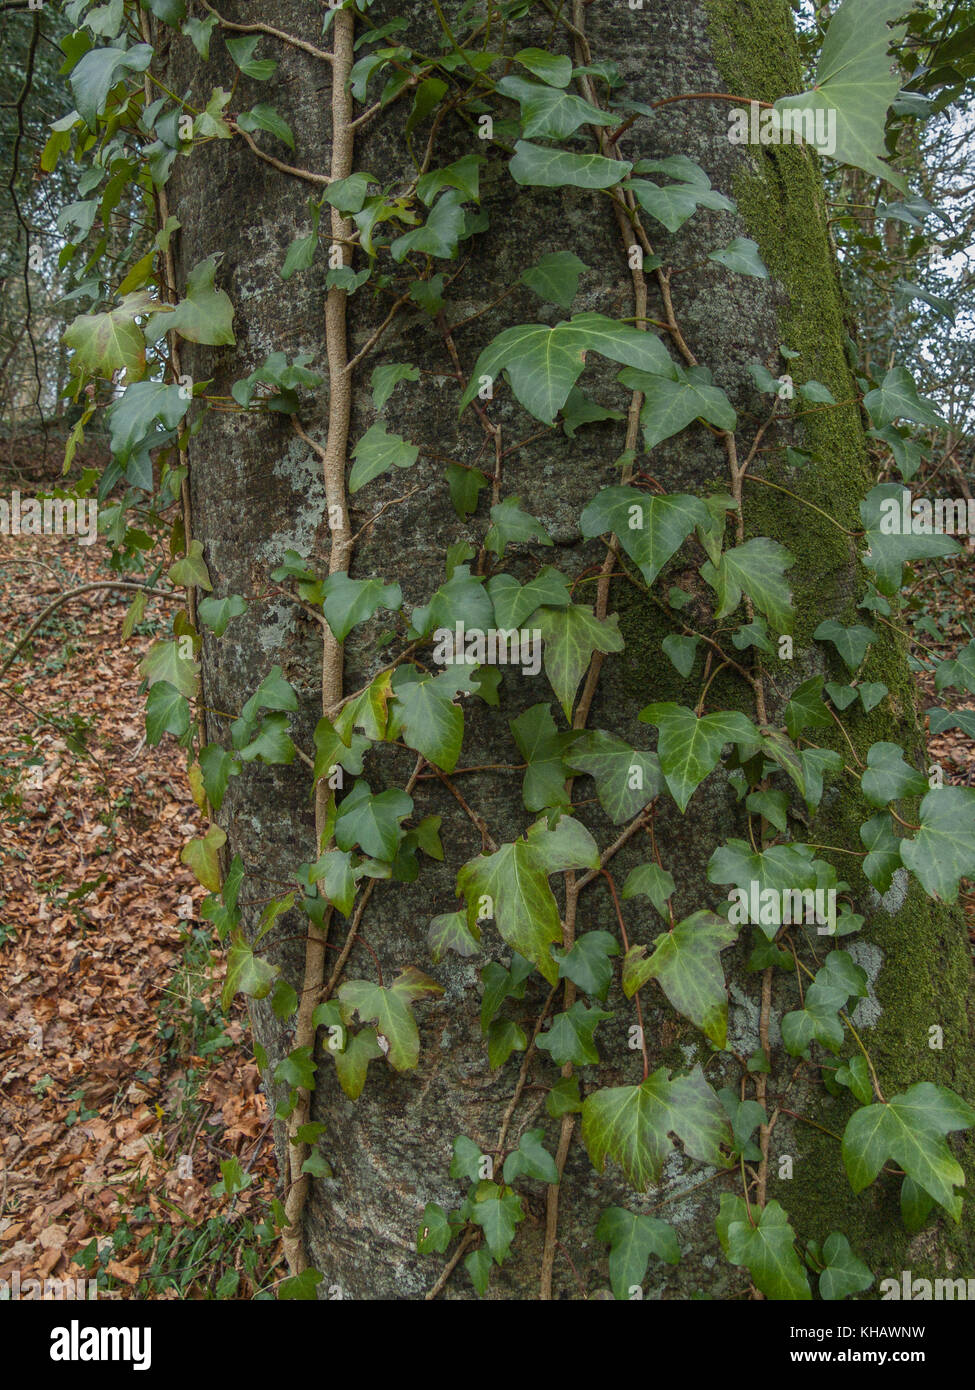 Vines of Common Ivy / Hedera helix smothering the trunk of a host tree. Hedera helix hanging, climbing plants, hedera helix on tree, creeping ivy. Stock Photo